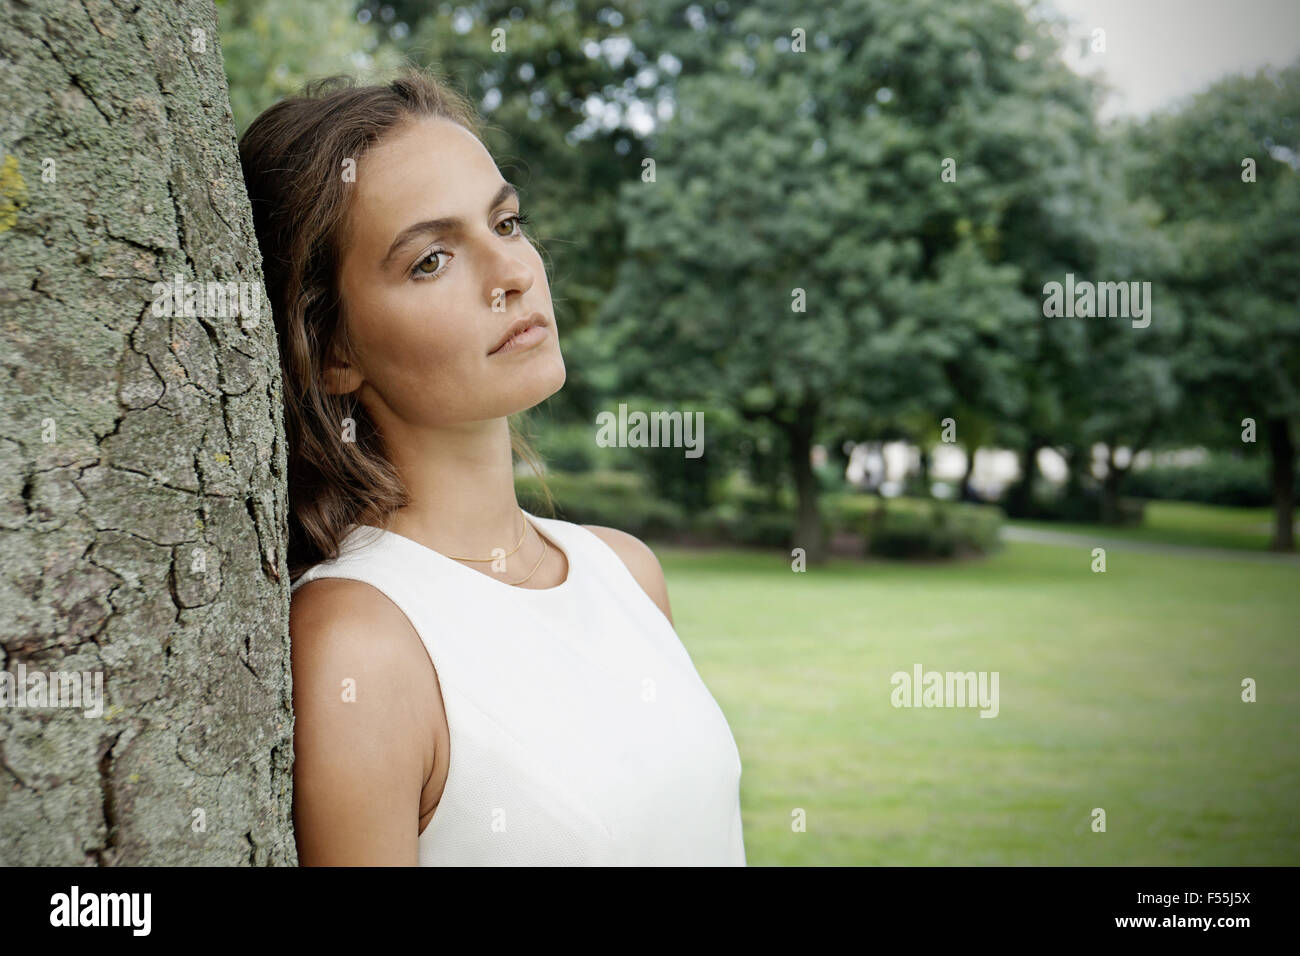 Sad young woman leaning against tree Banque D'Images